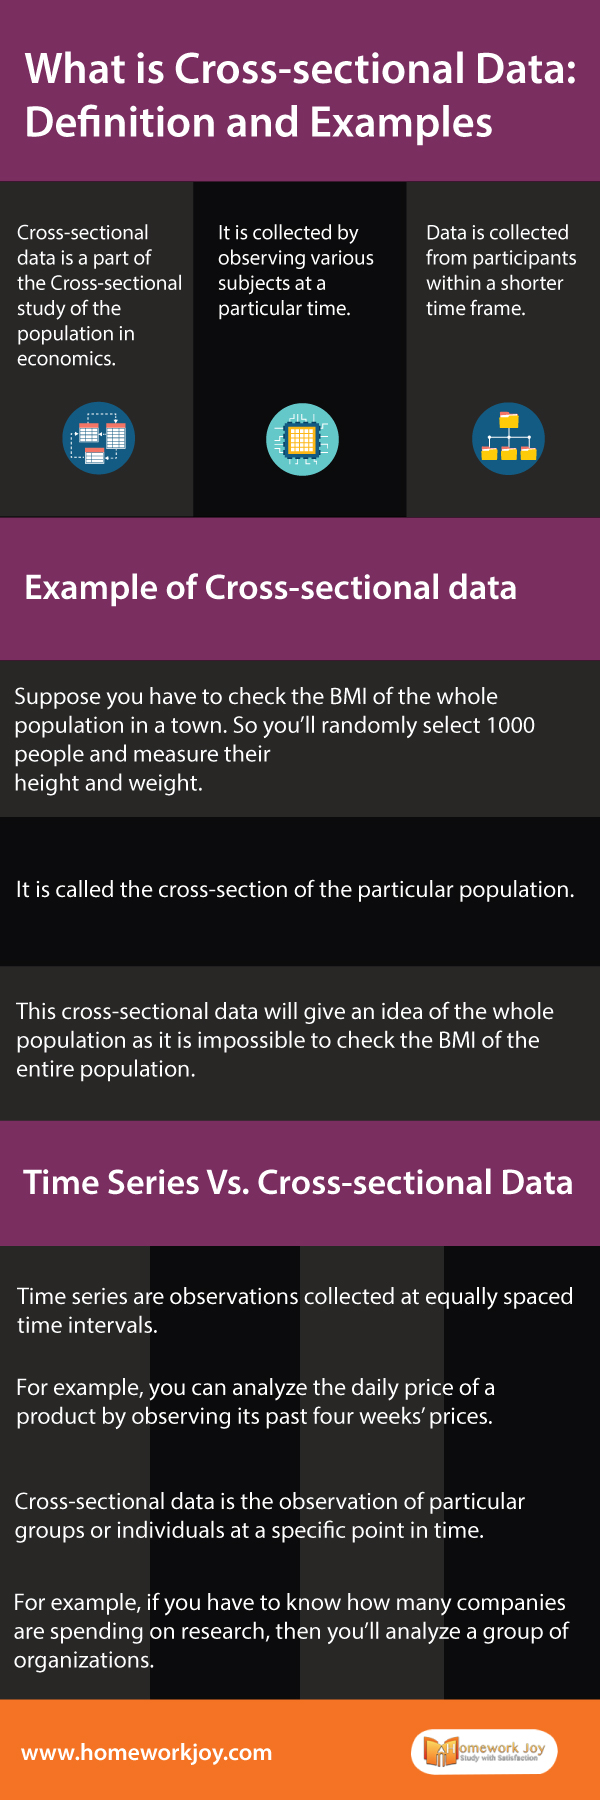 What is Cross sectional Data